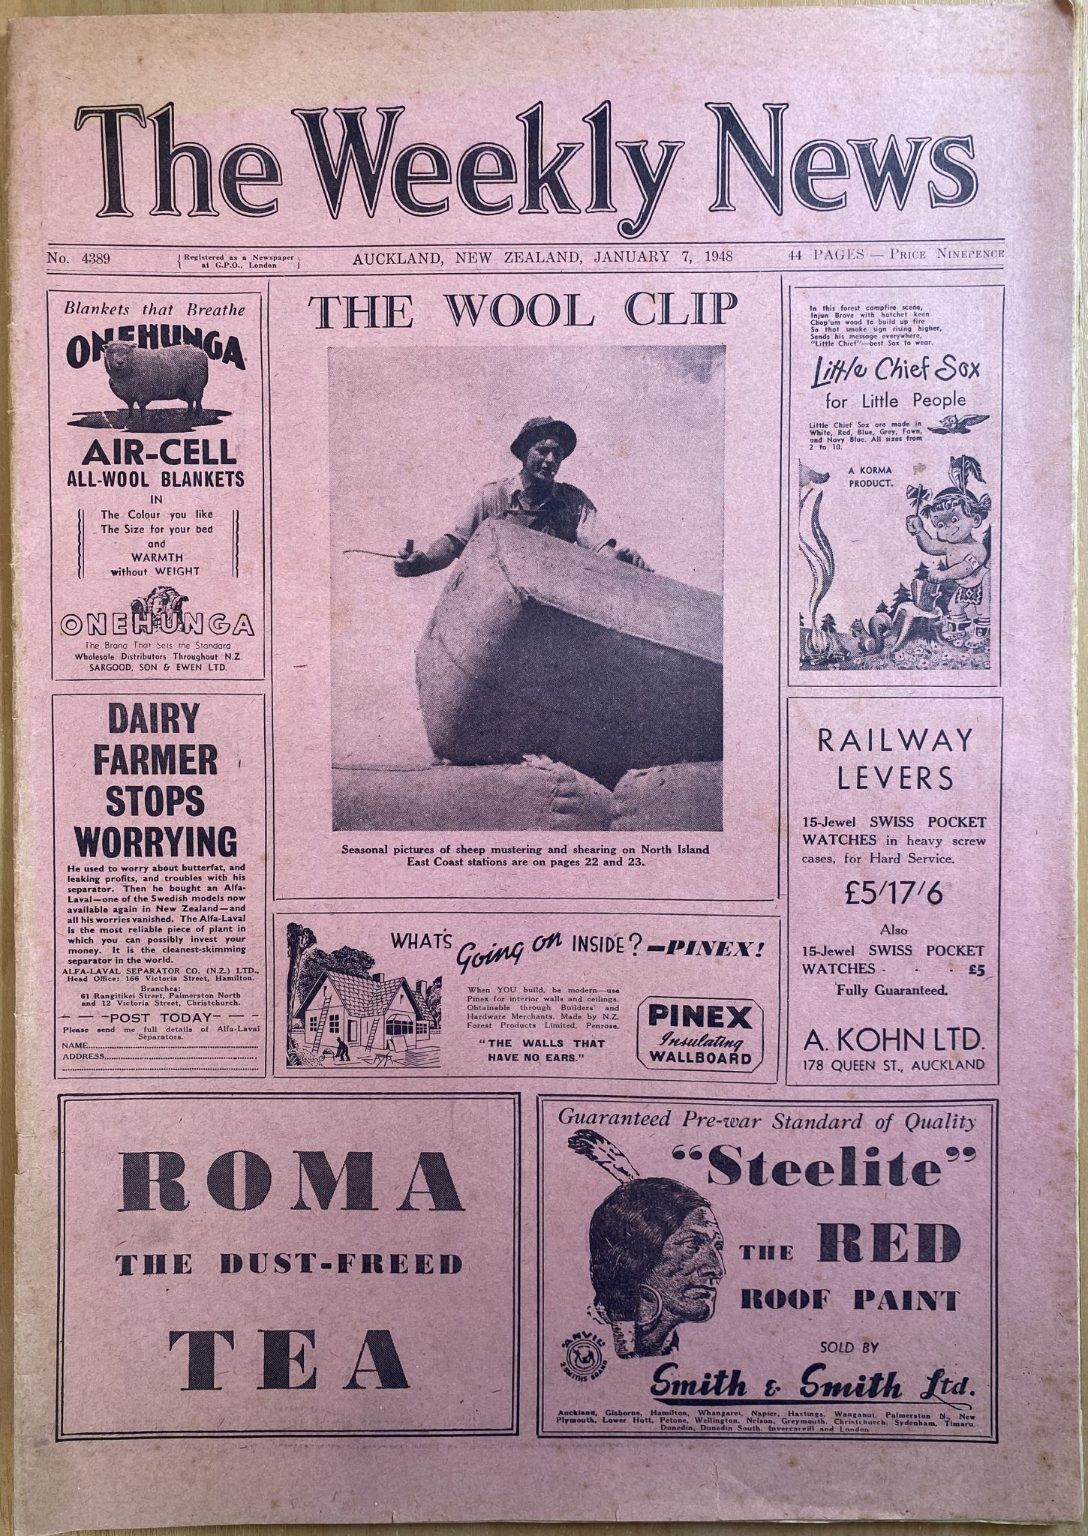 OLD NEWSPAPER: The Weekly News - No. 4389, 7 January 1948